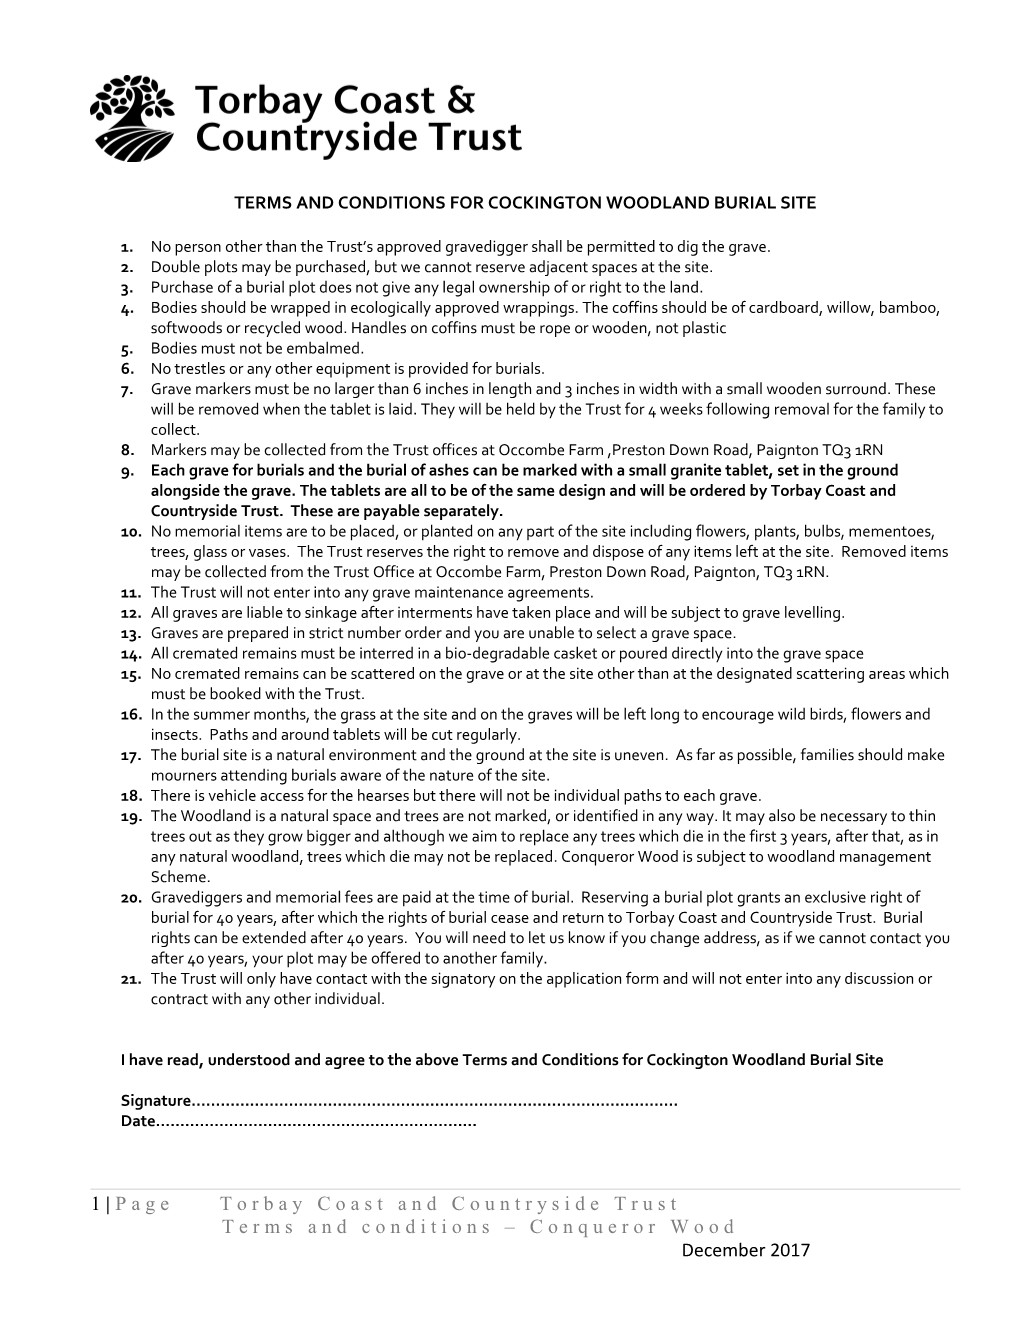 Terms and Conditions for Cockington Woodland Burial Site